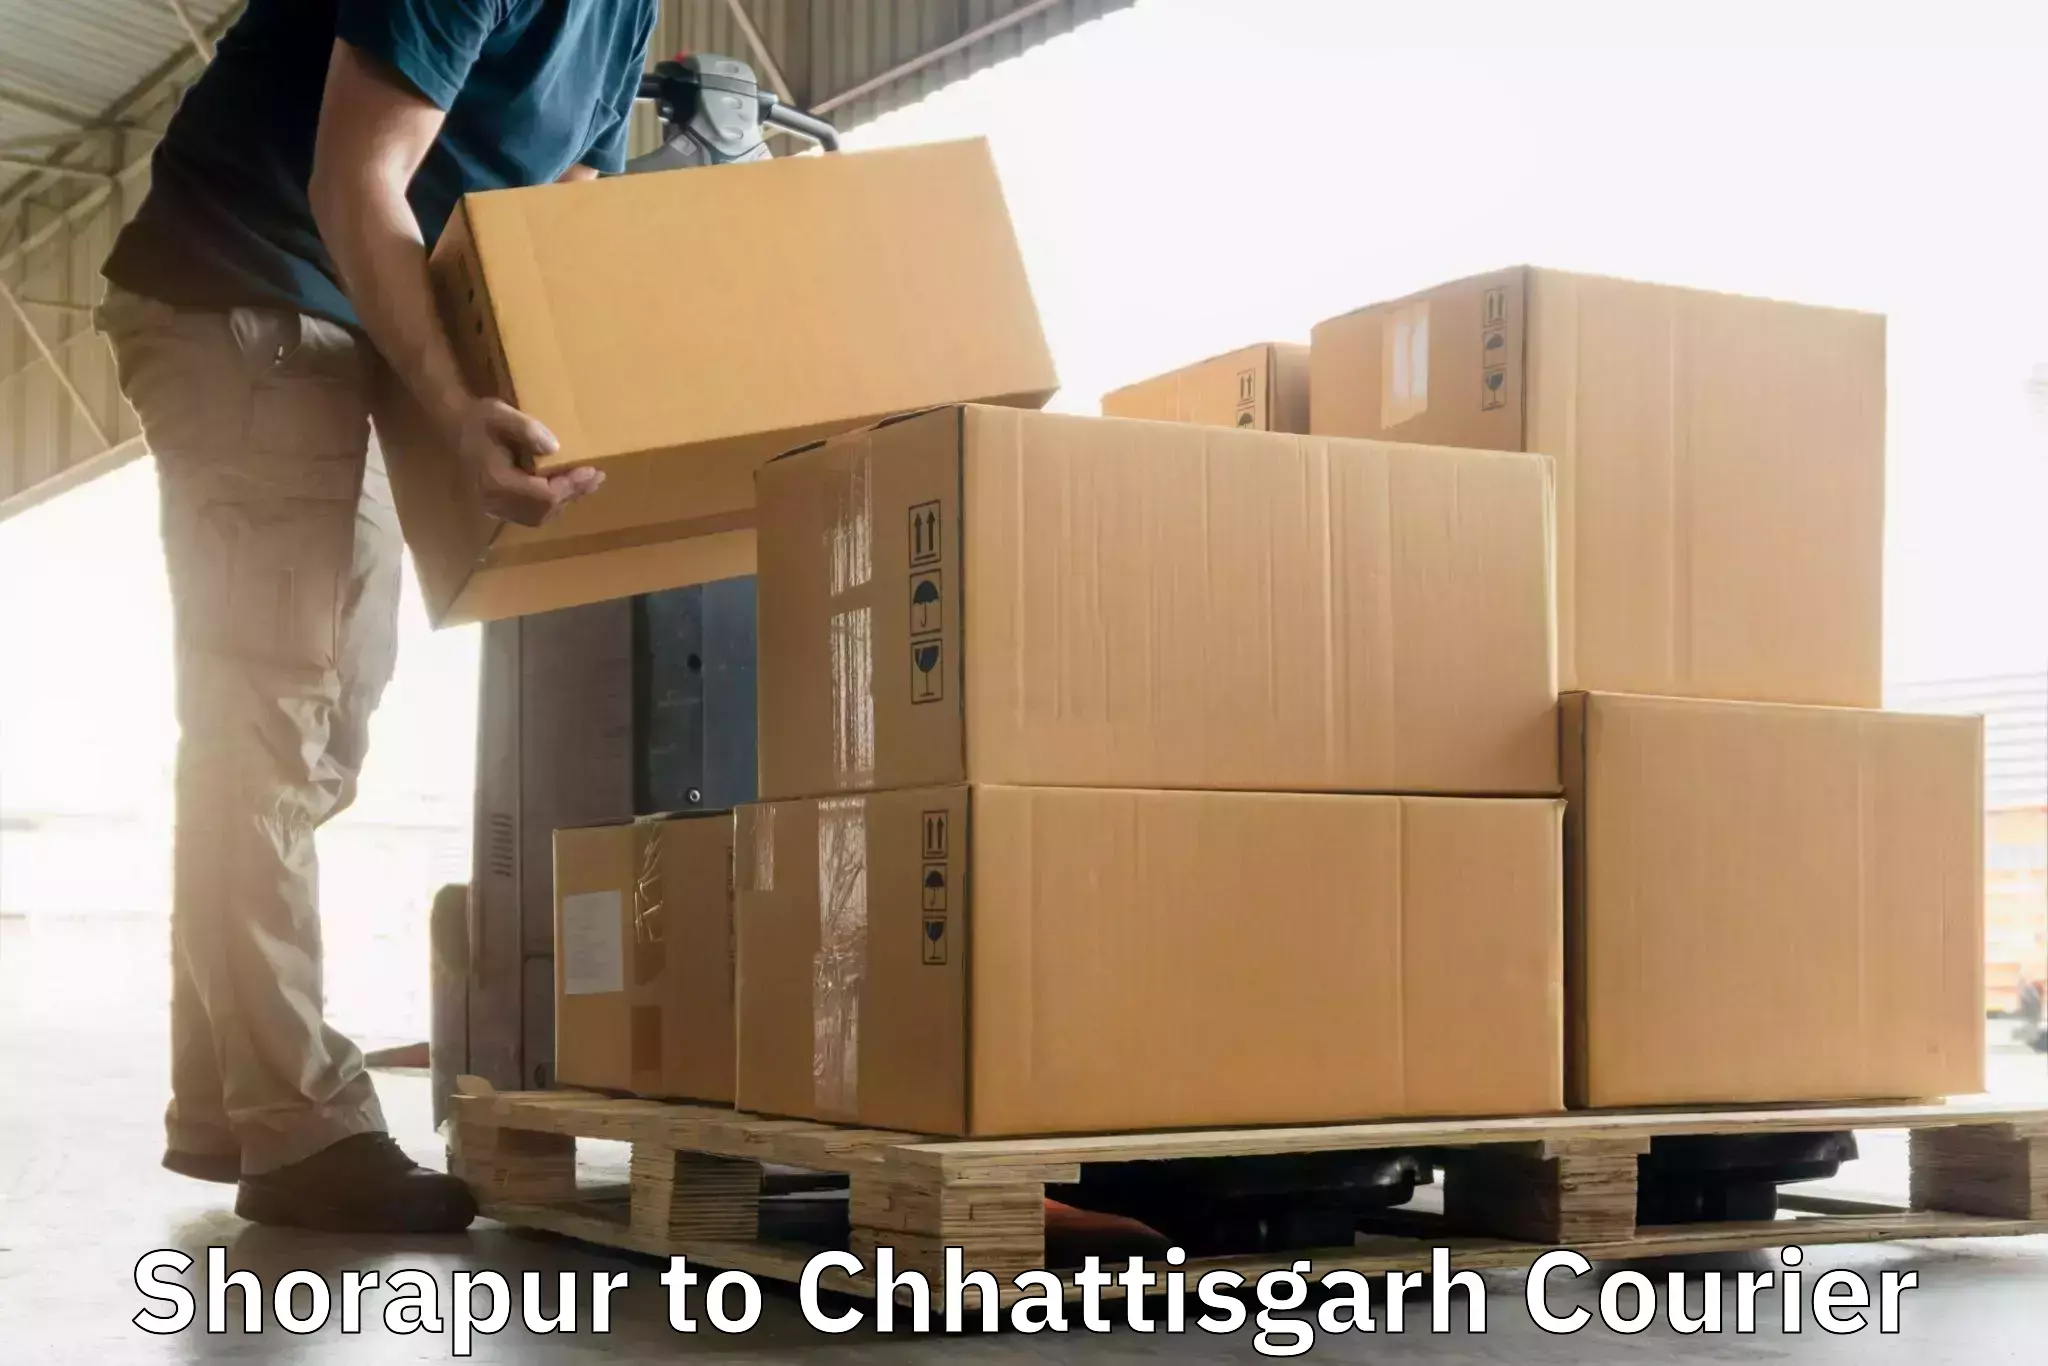 Business delivery service Shorapur to Bastar